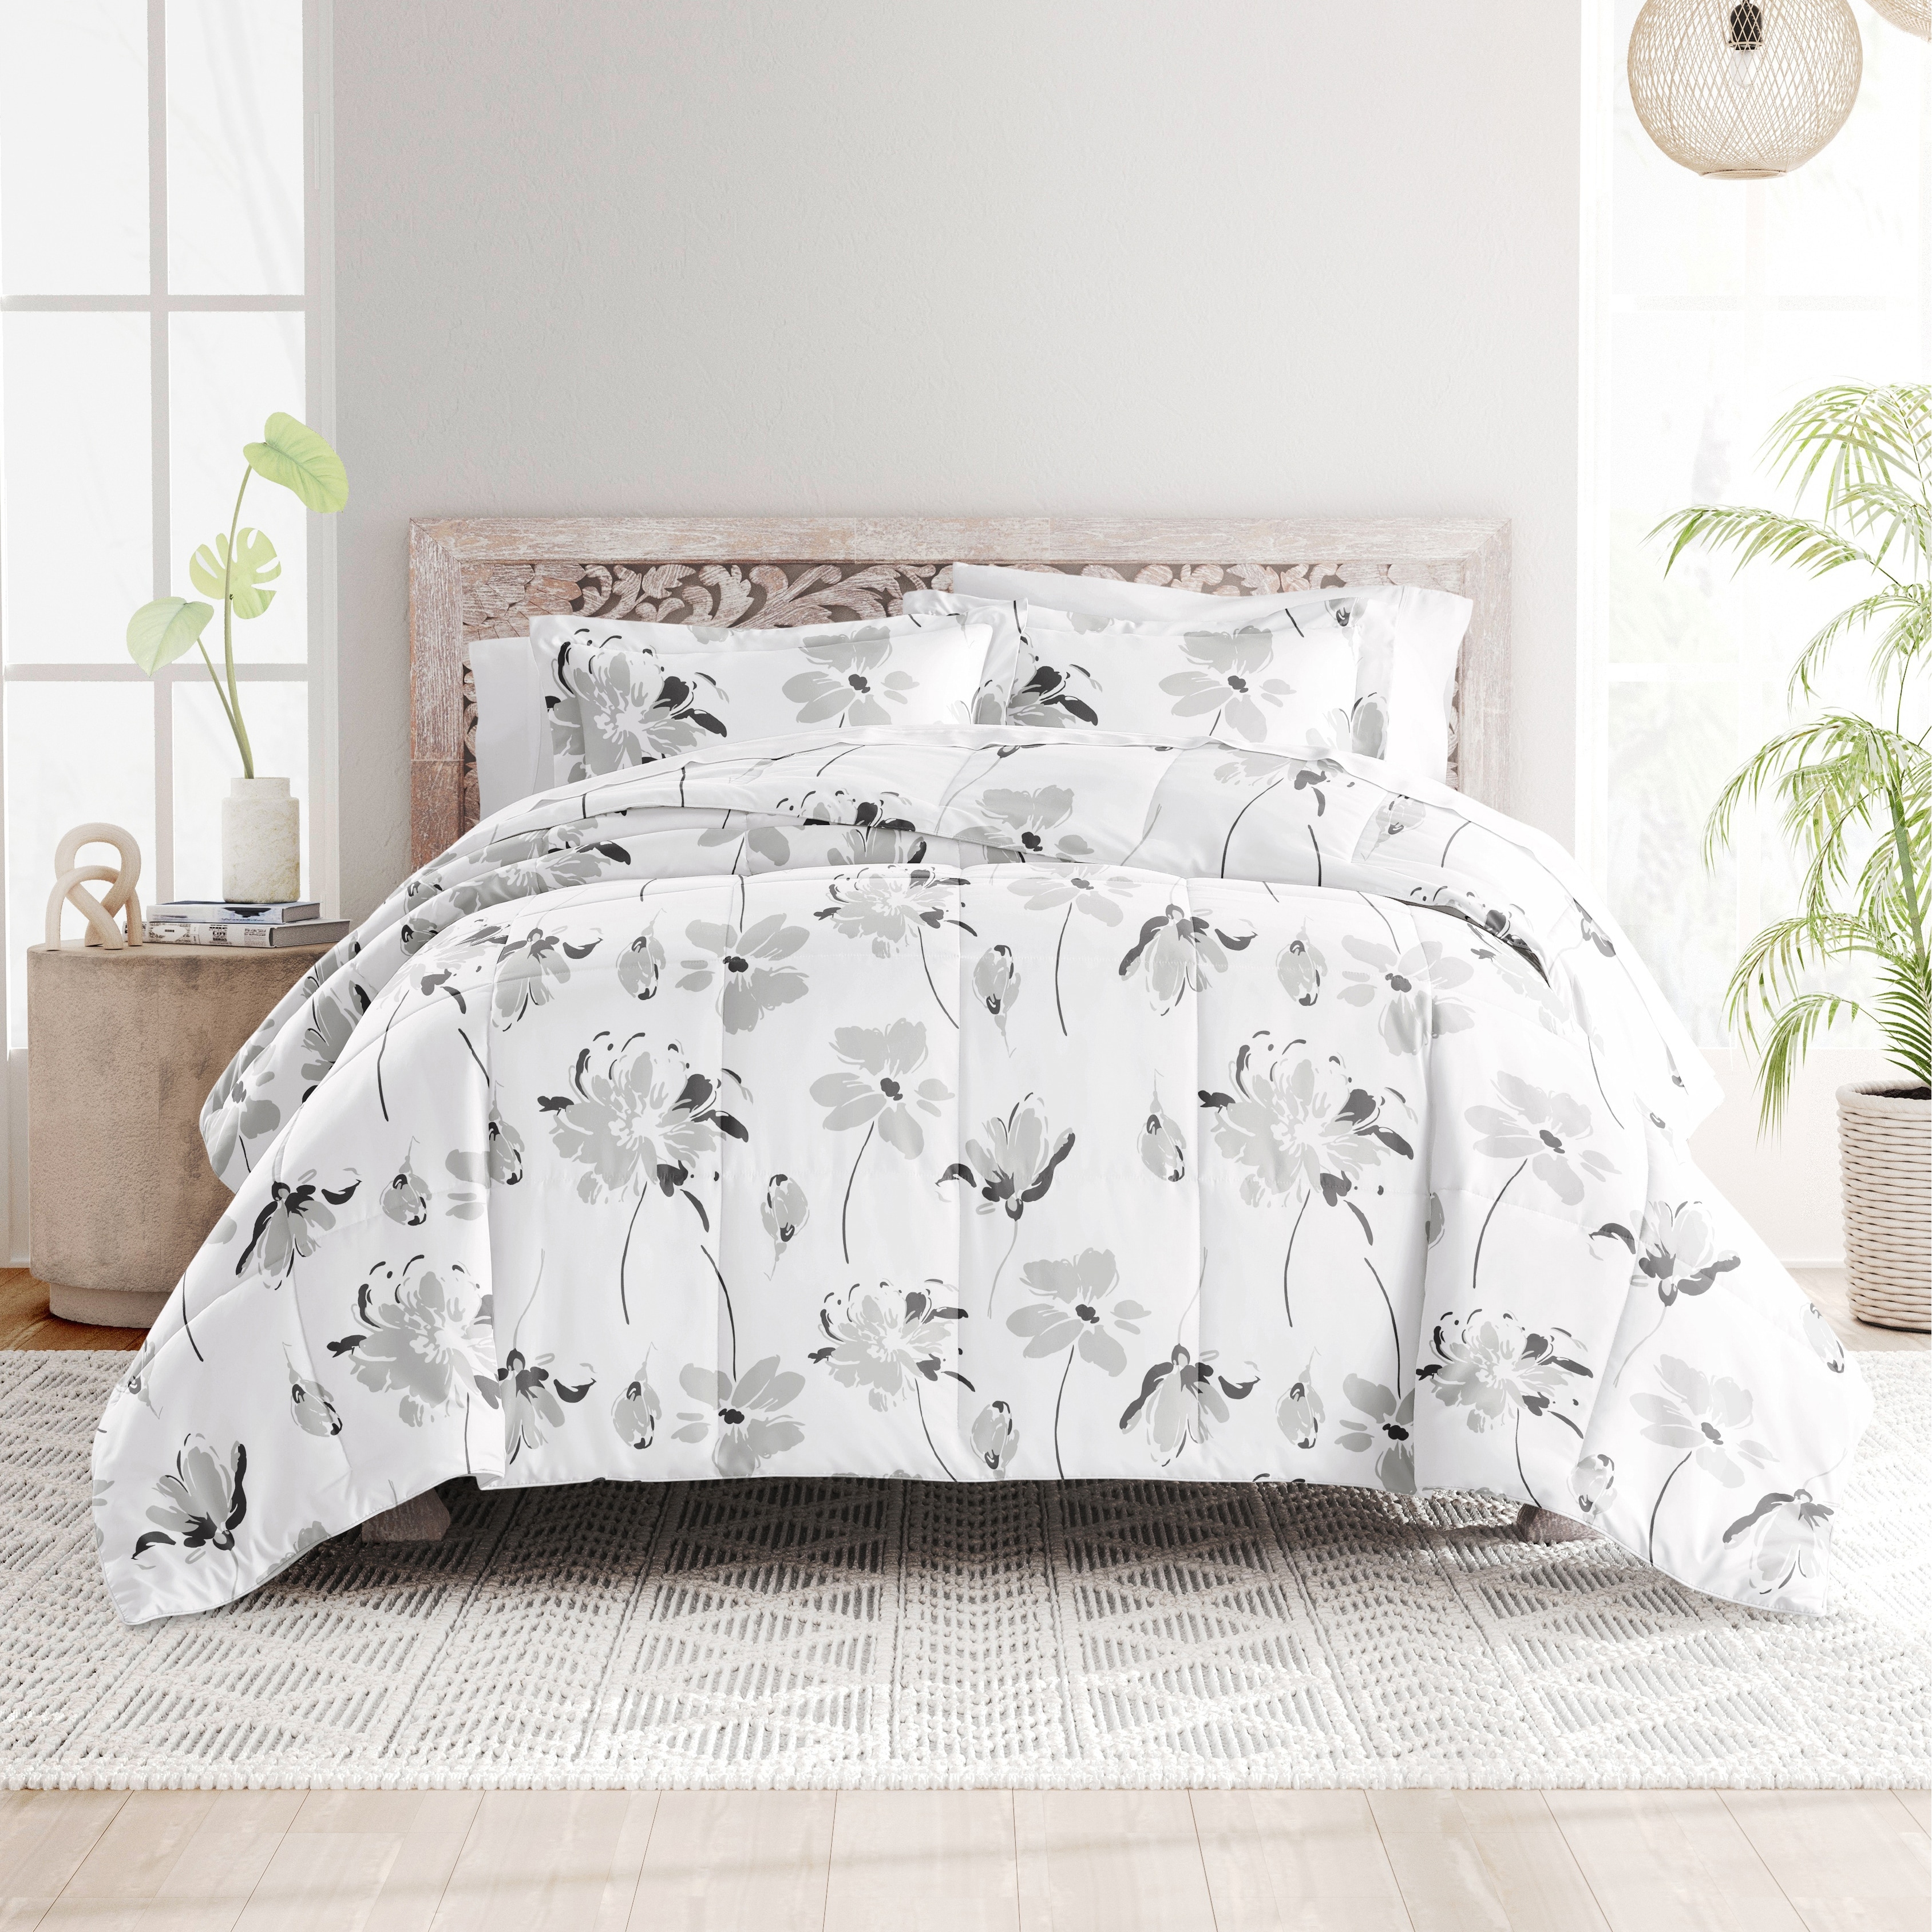 Microfiber Becky Cameron Comforters and Sets - Bed Bath & Beyond